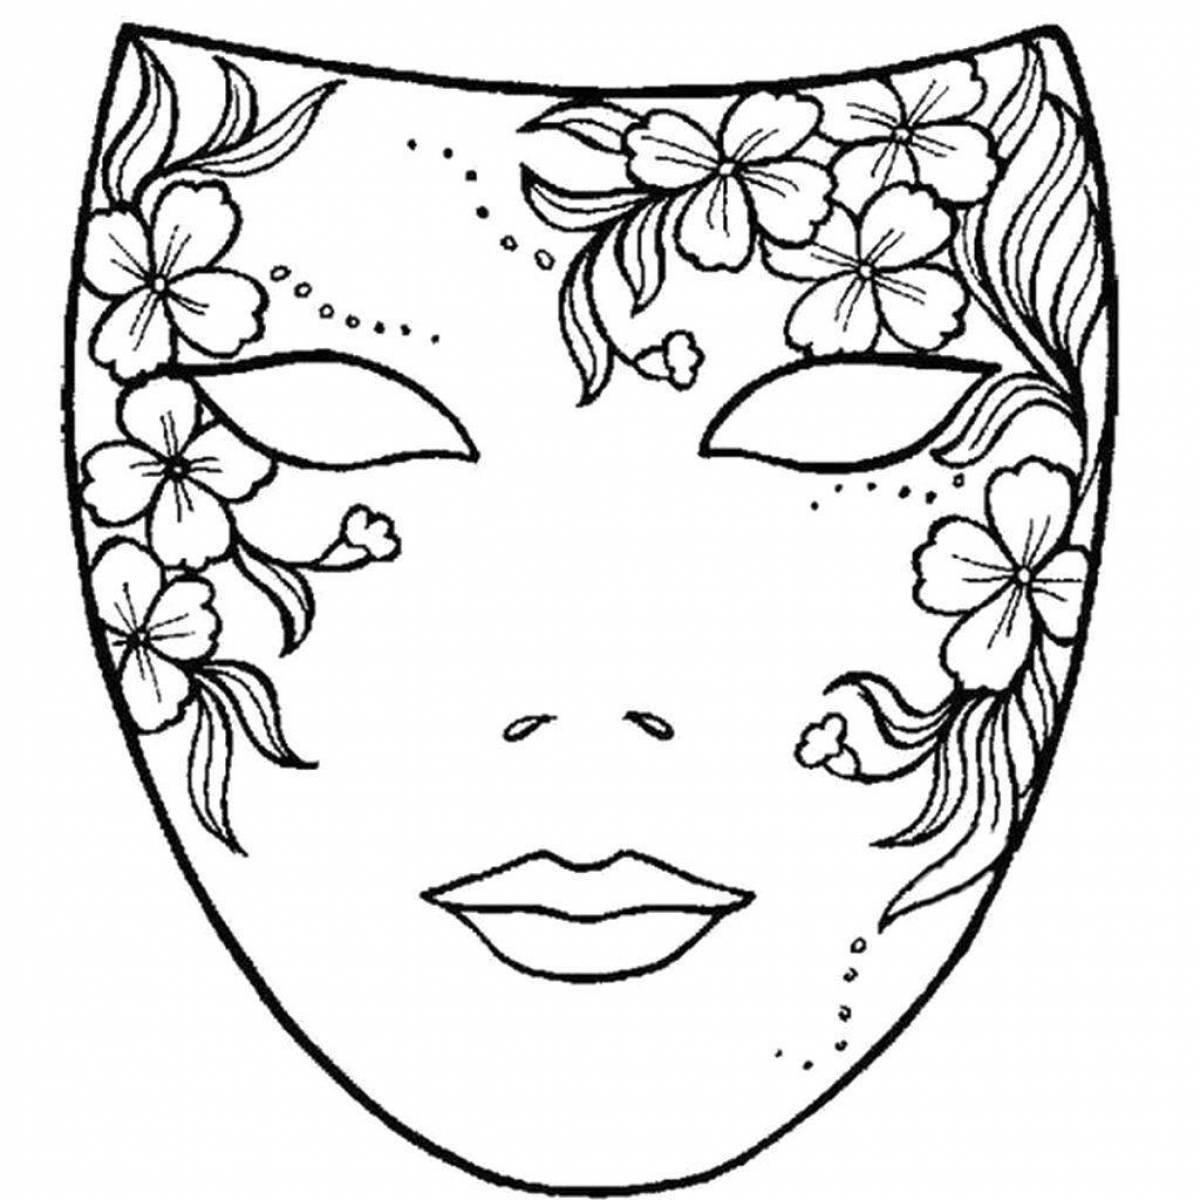 Exquisite coloring mask